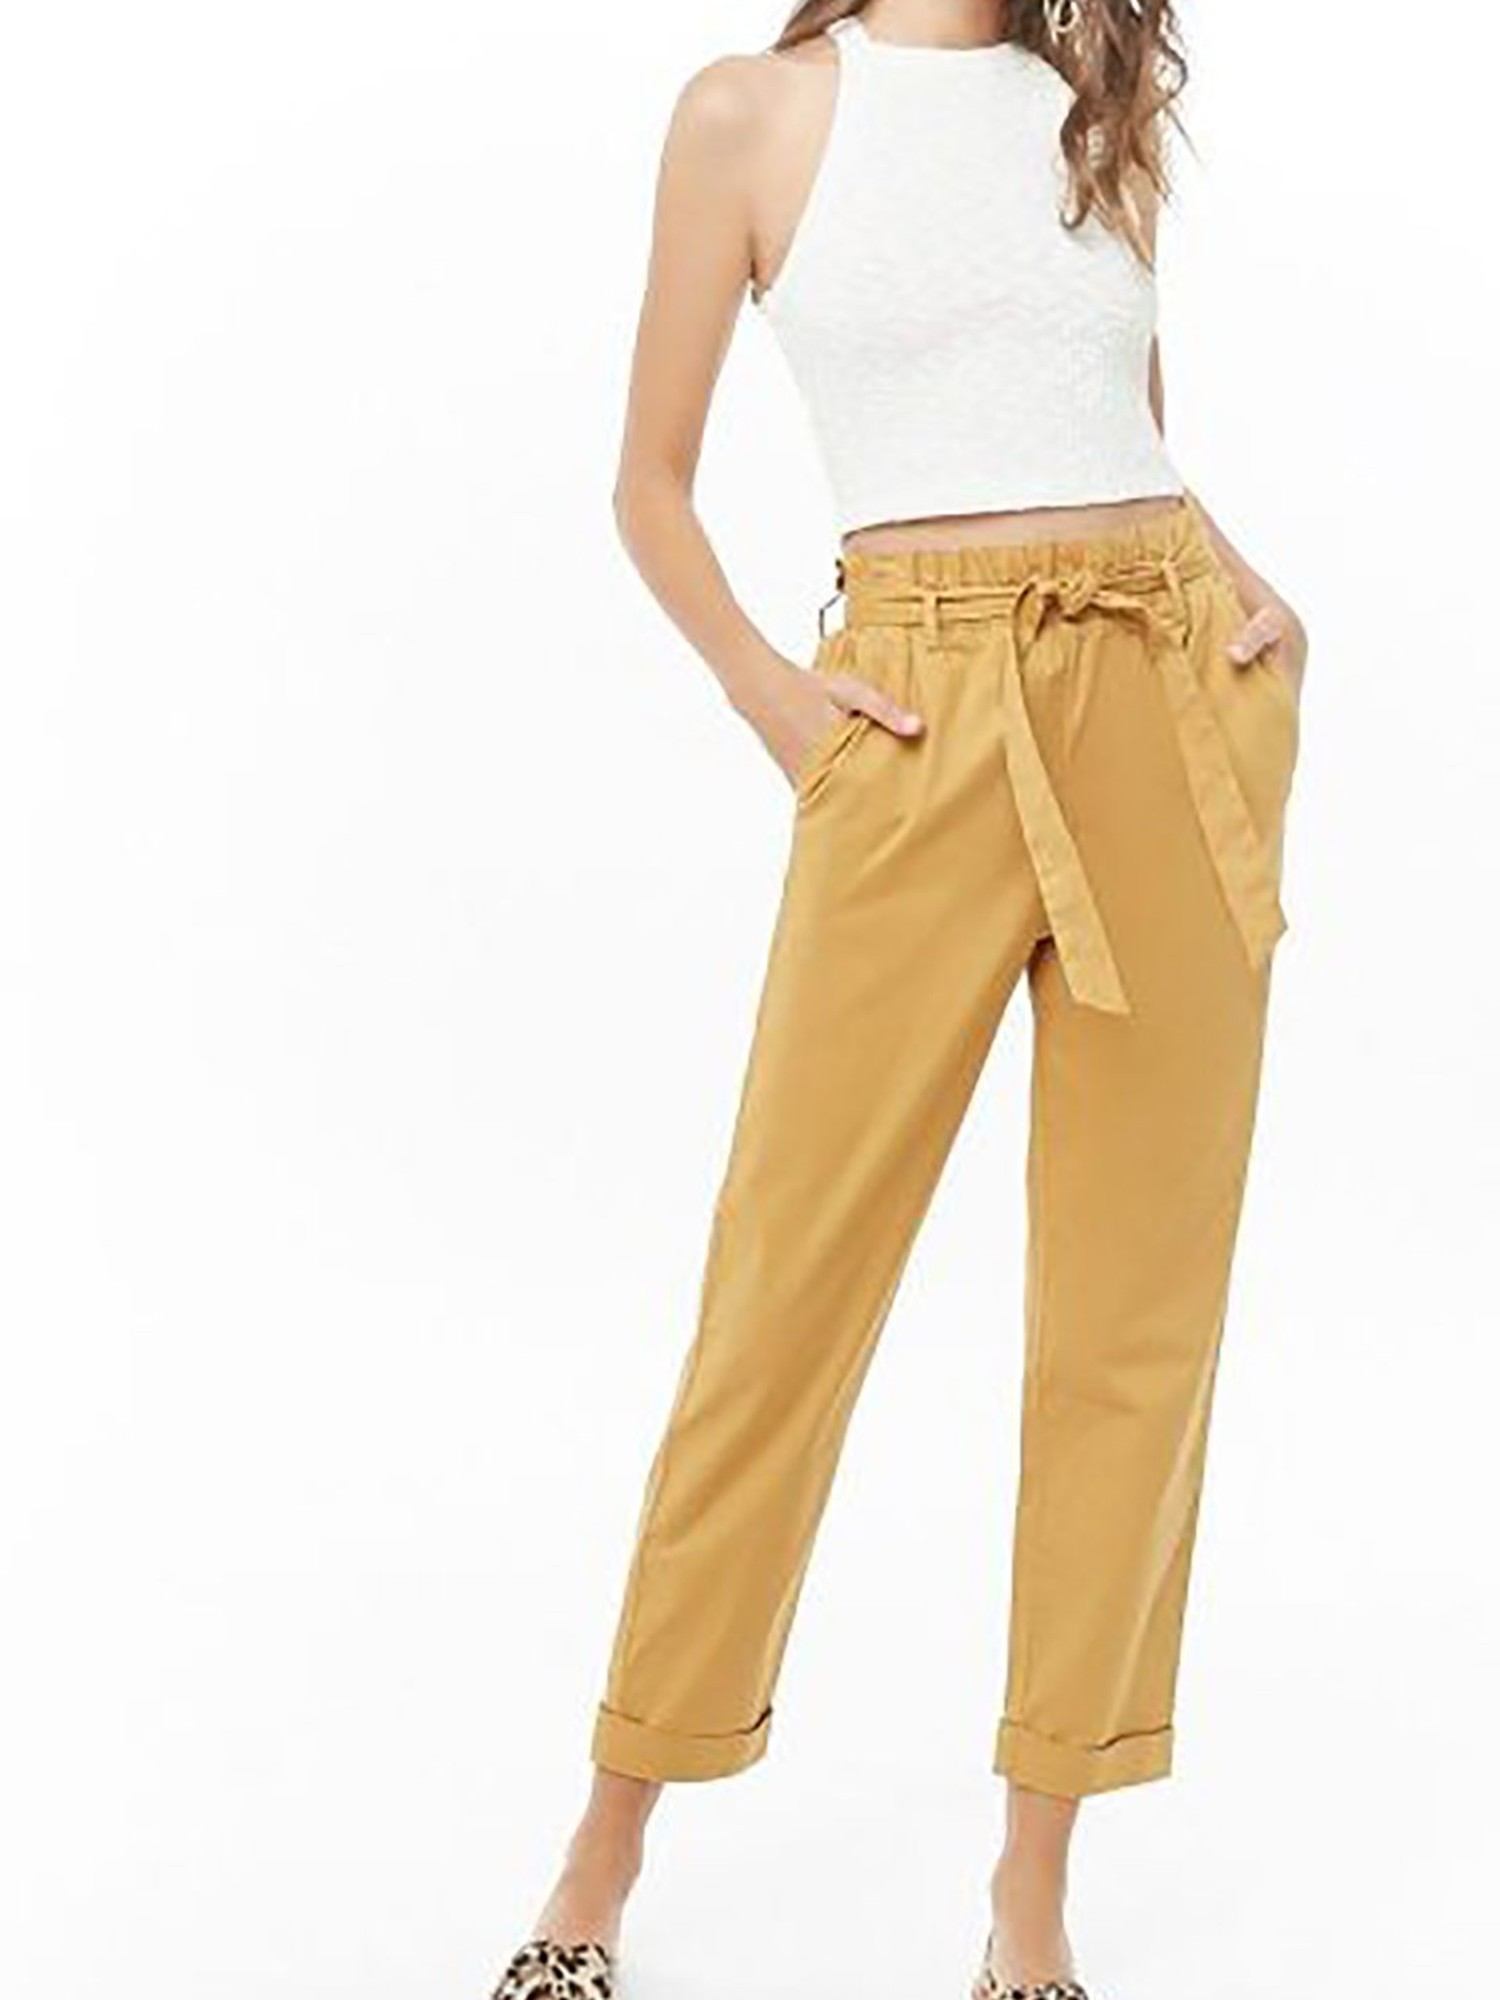 Shop WideLeg Plaid Pants for Women from latest collection at Forever 21   324144